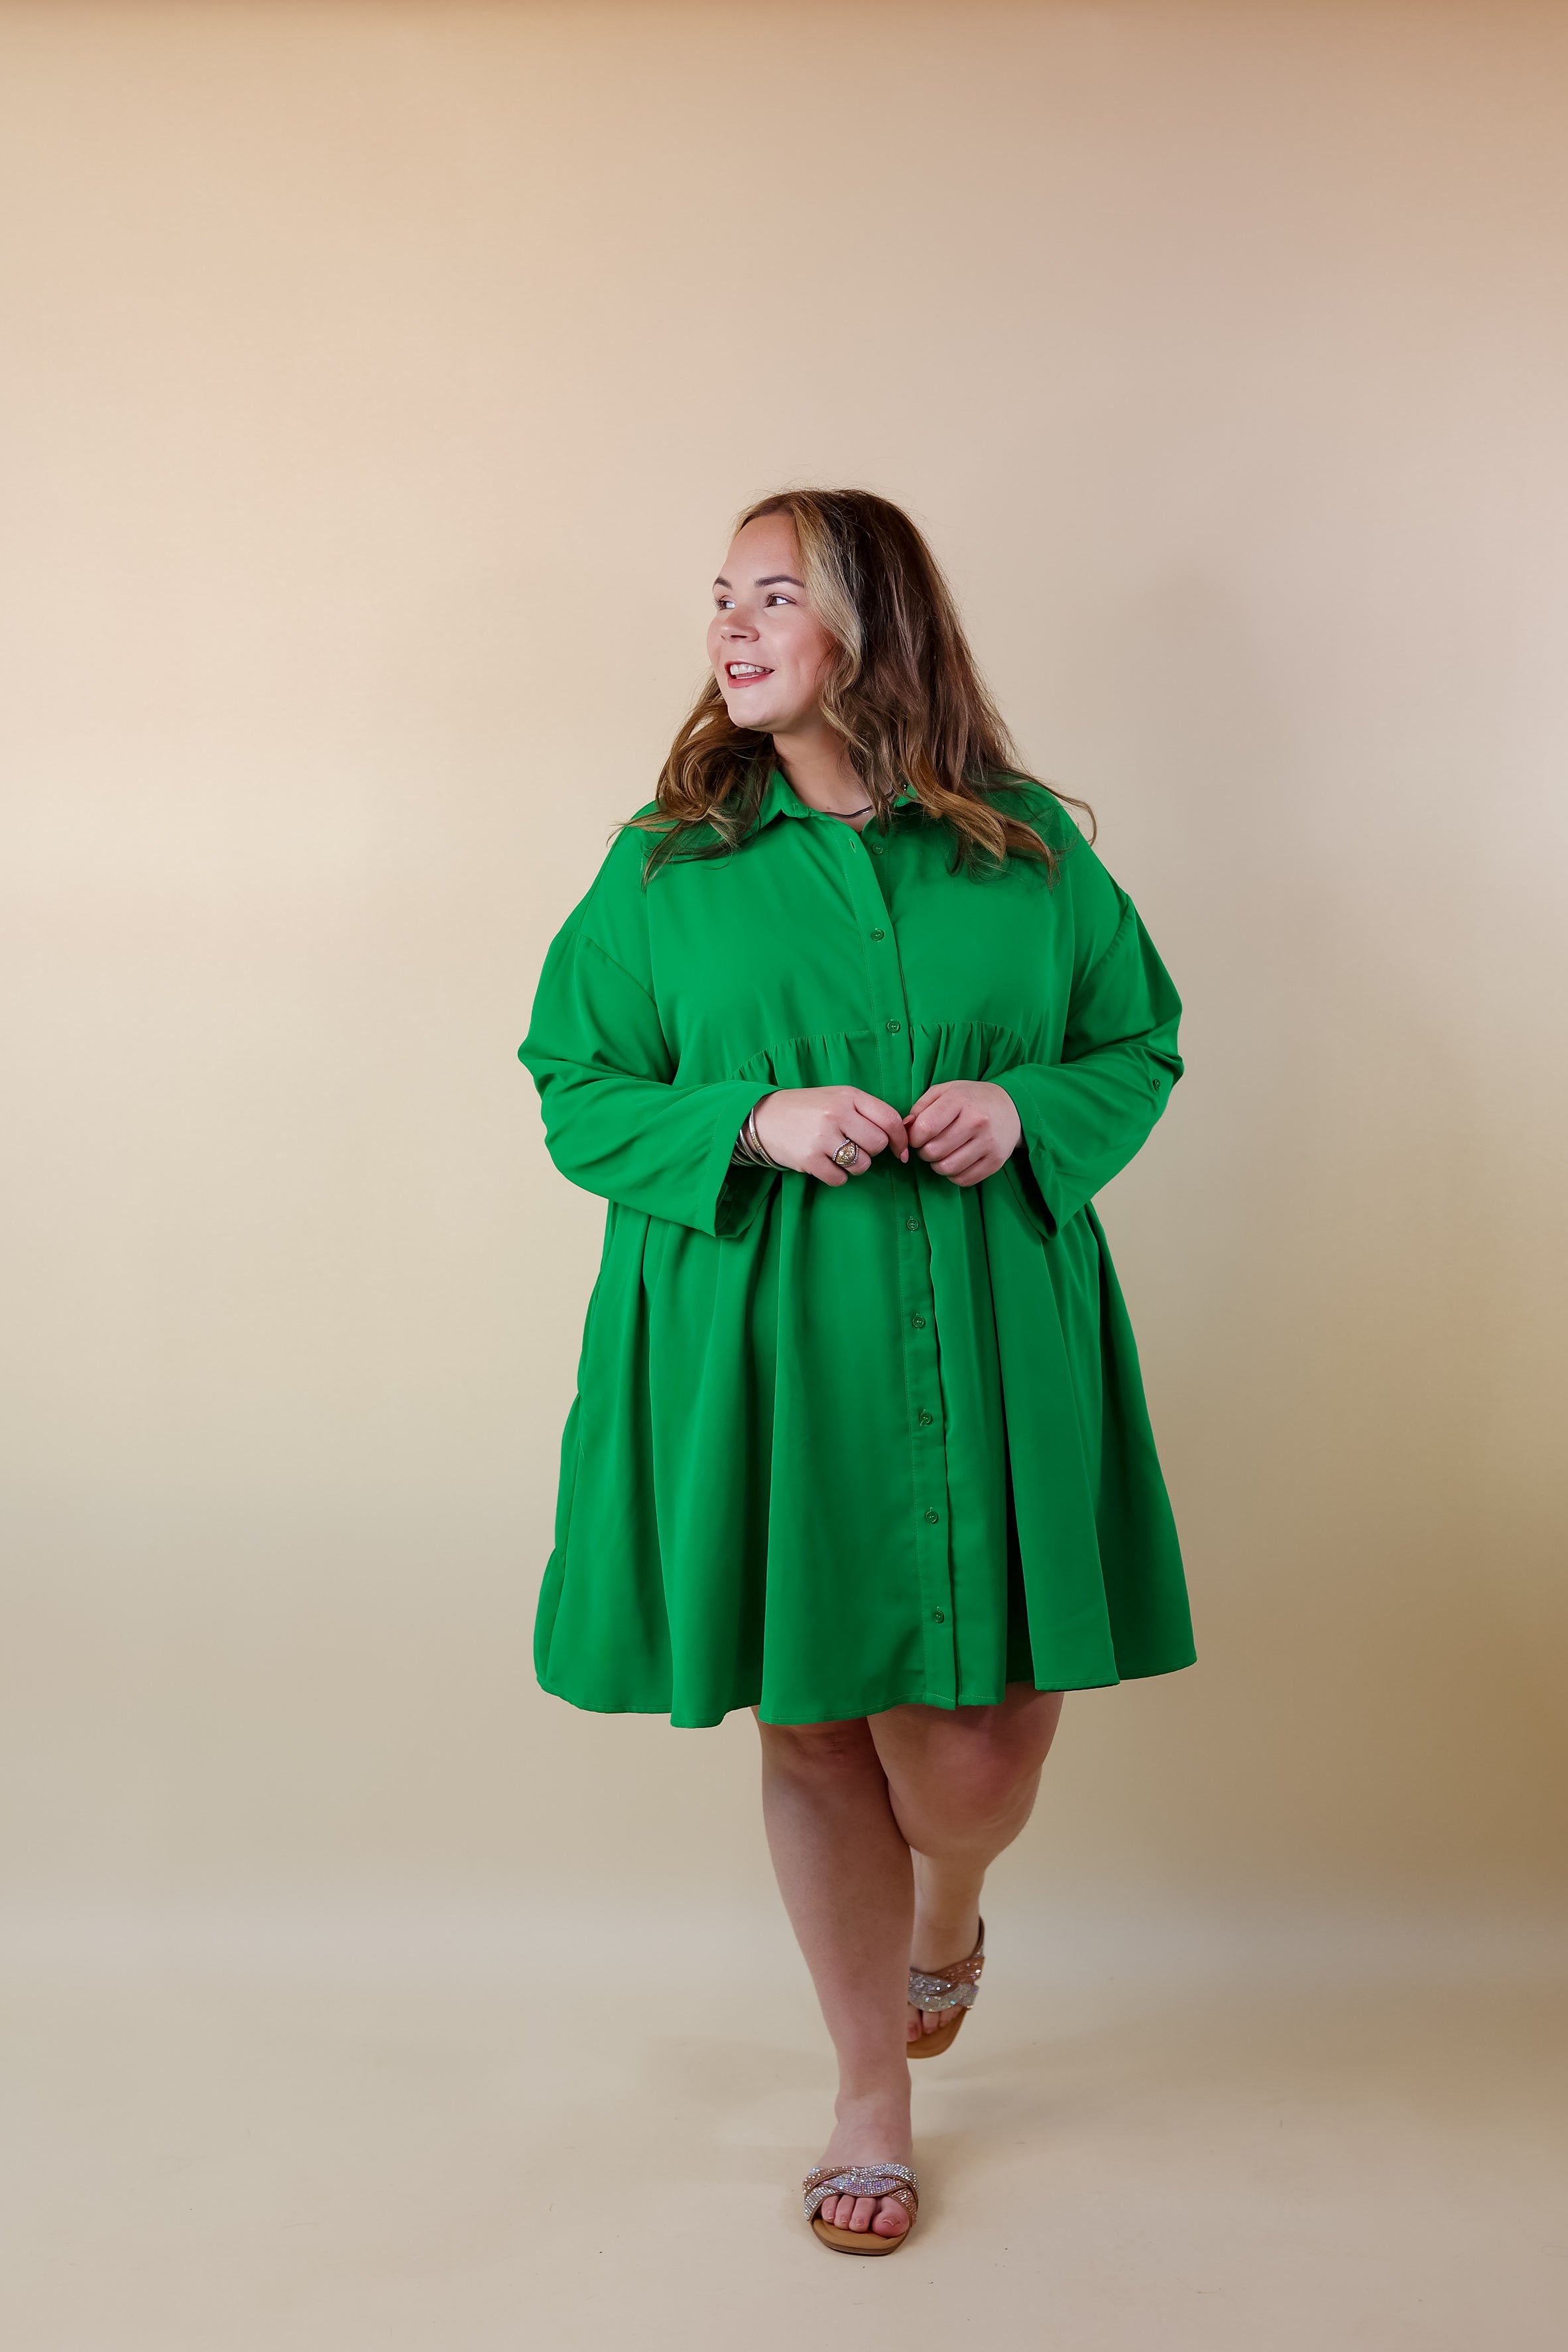 Risky Business Button Up Babydoll Dress in Green - Giddy Up Glamour Boutique